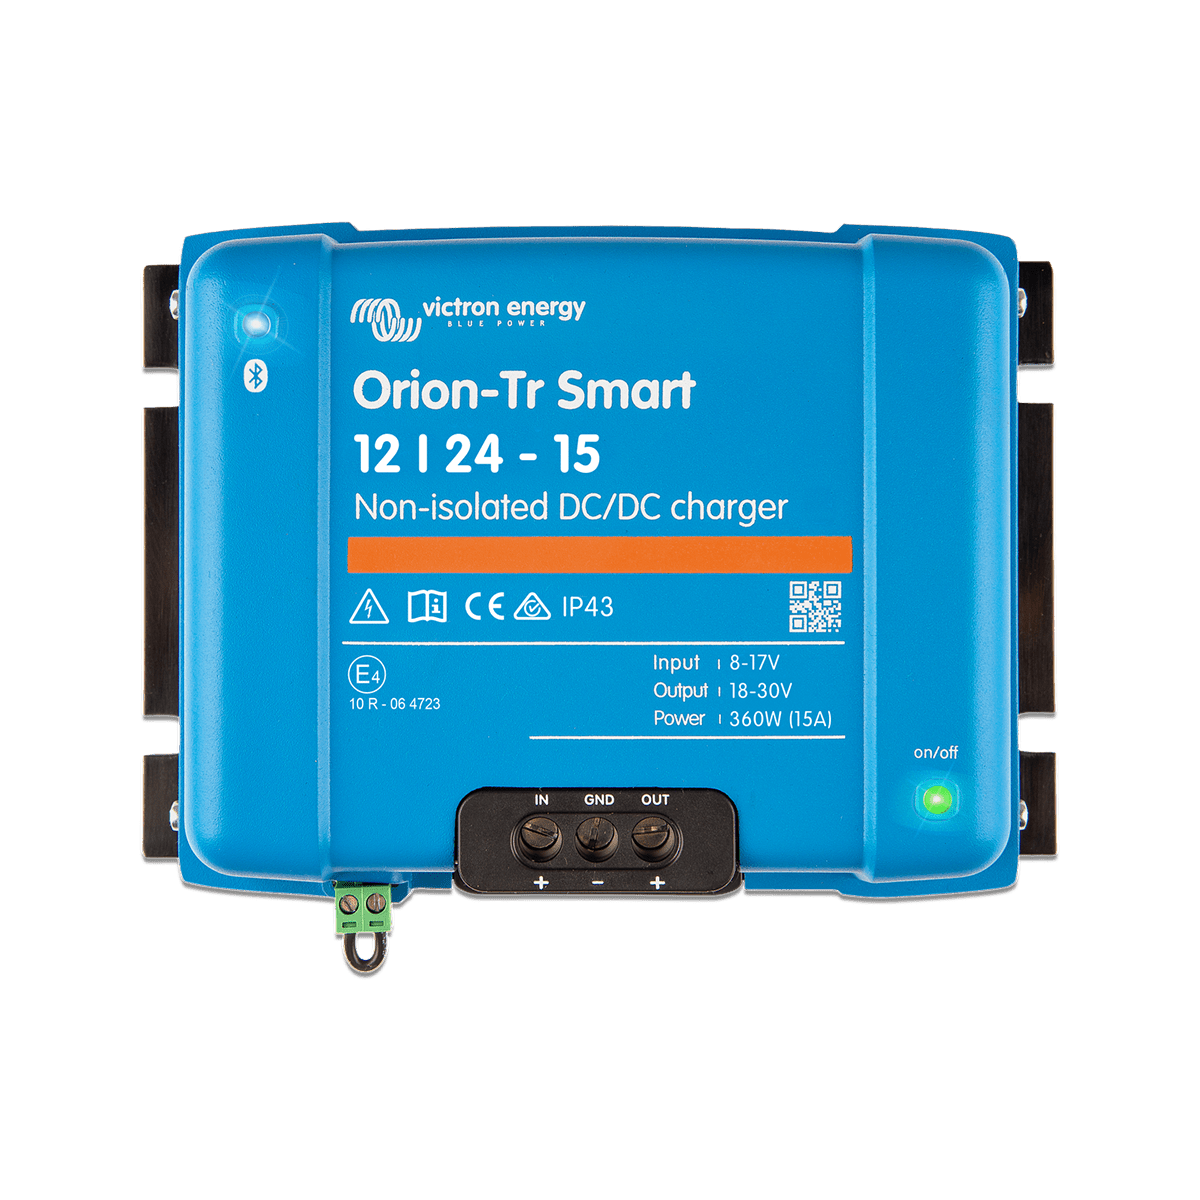 Chargeur DC/DC Orion Smart 12V|24V 15A (360W) non isolé - Pharos Energies